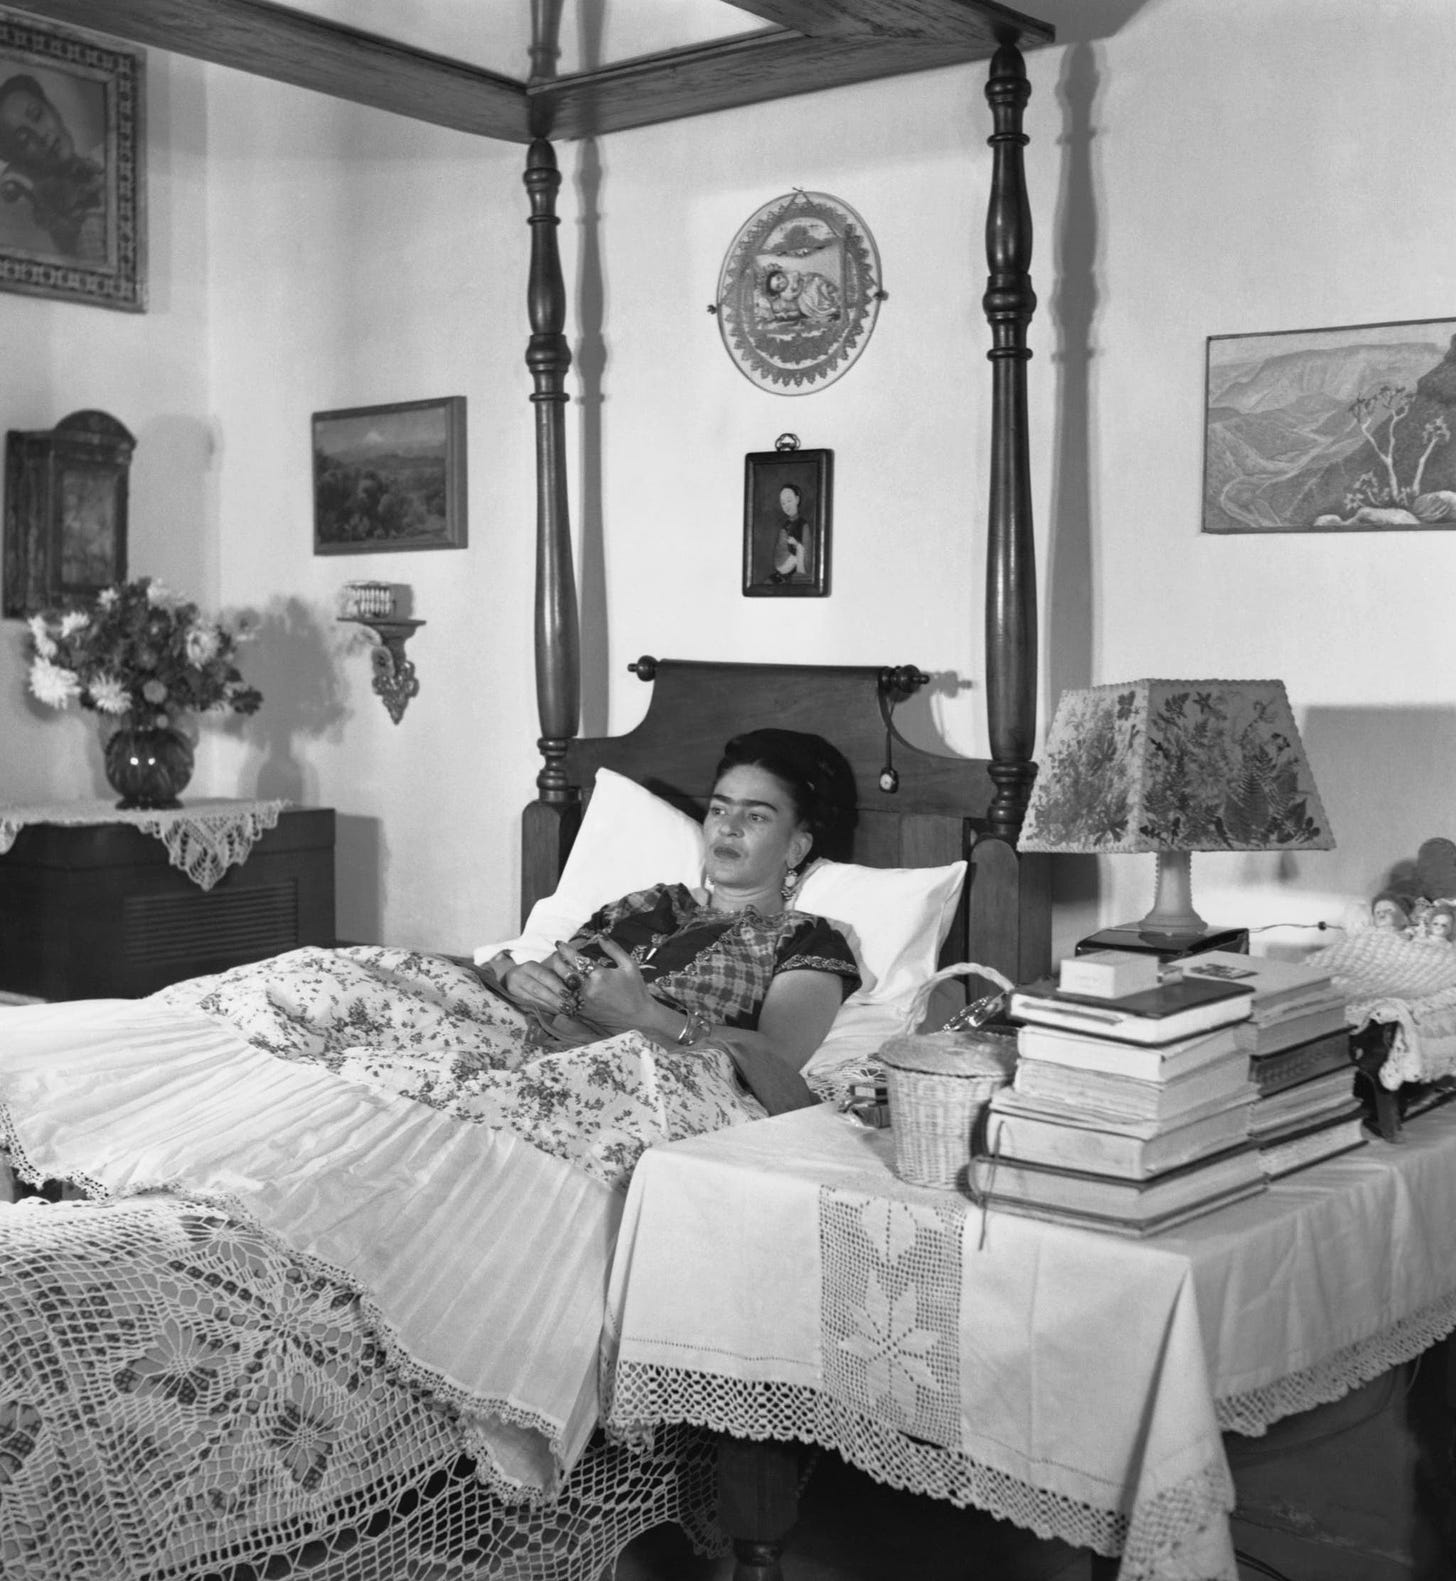 A photograph of Frida Kahlo, in one of her bedridden states in her home in Mexico City